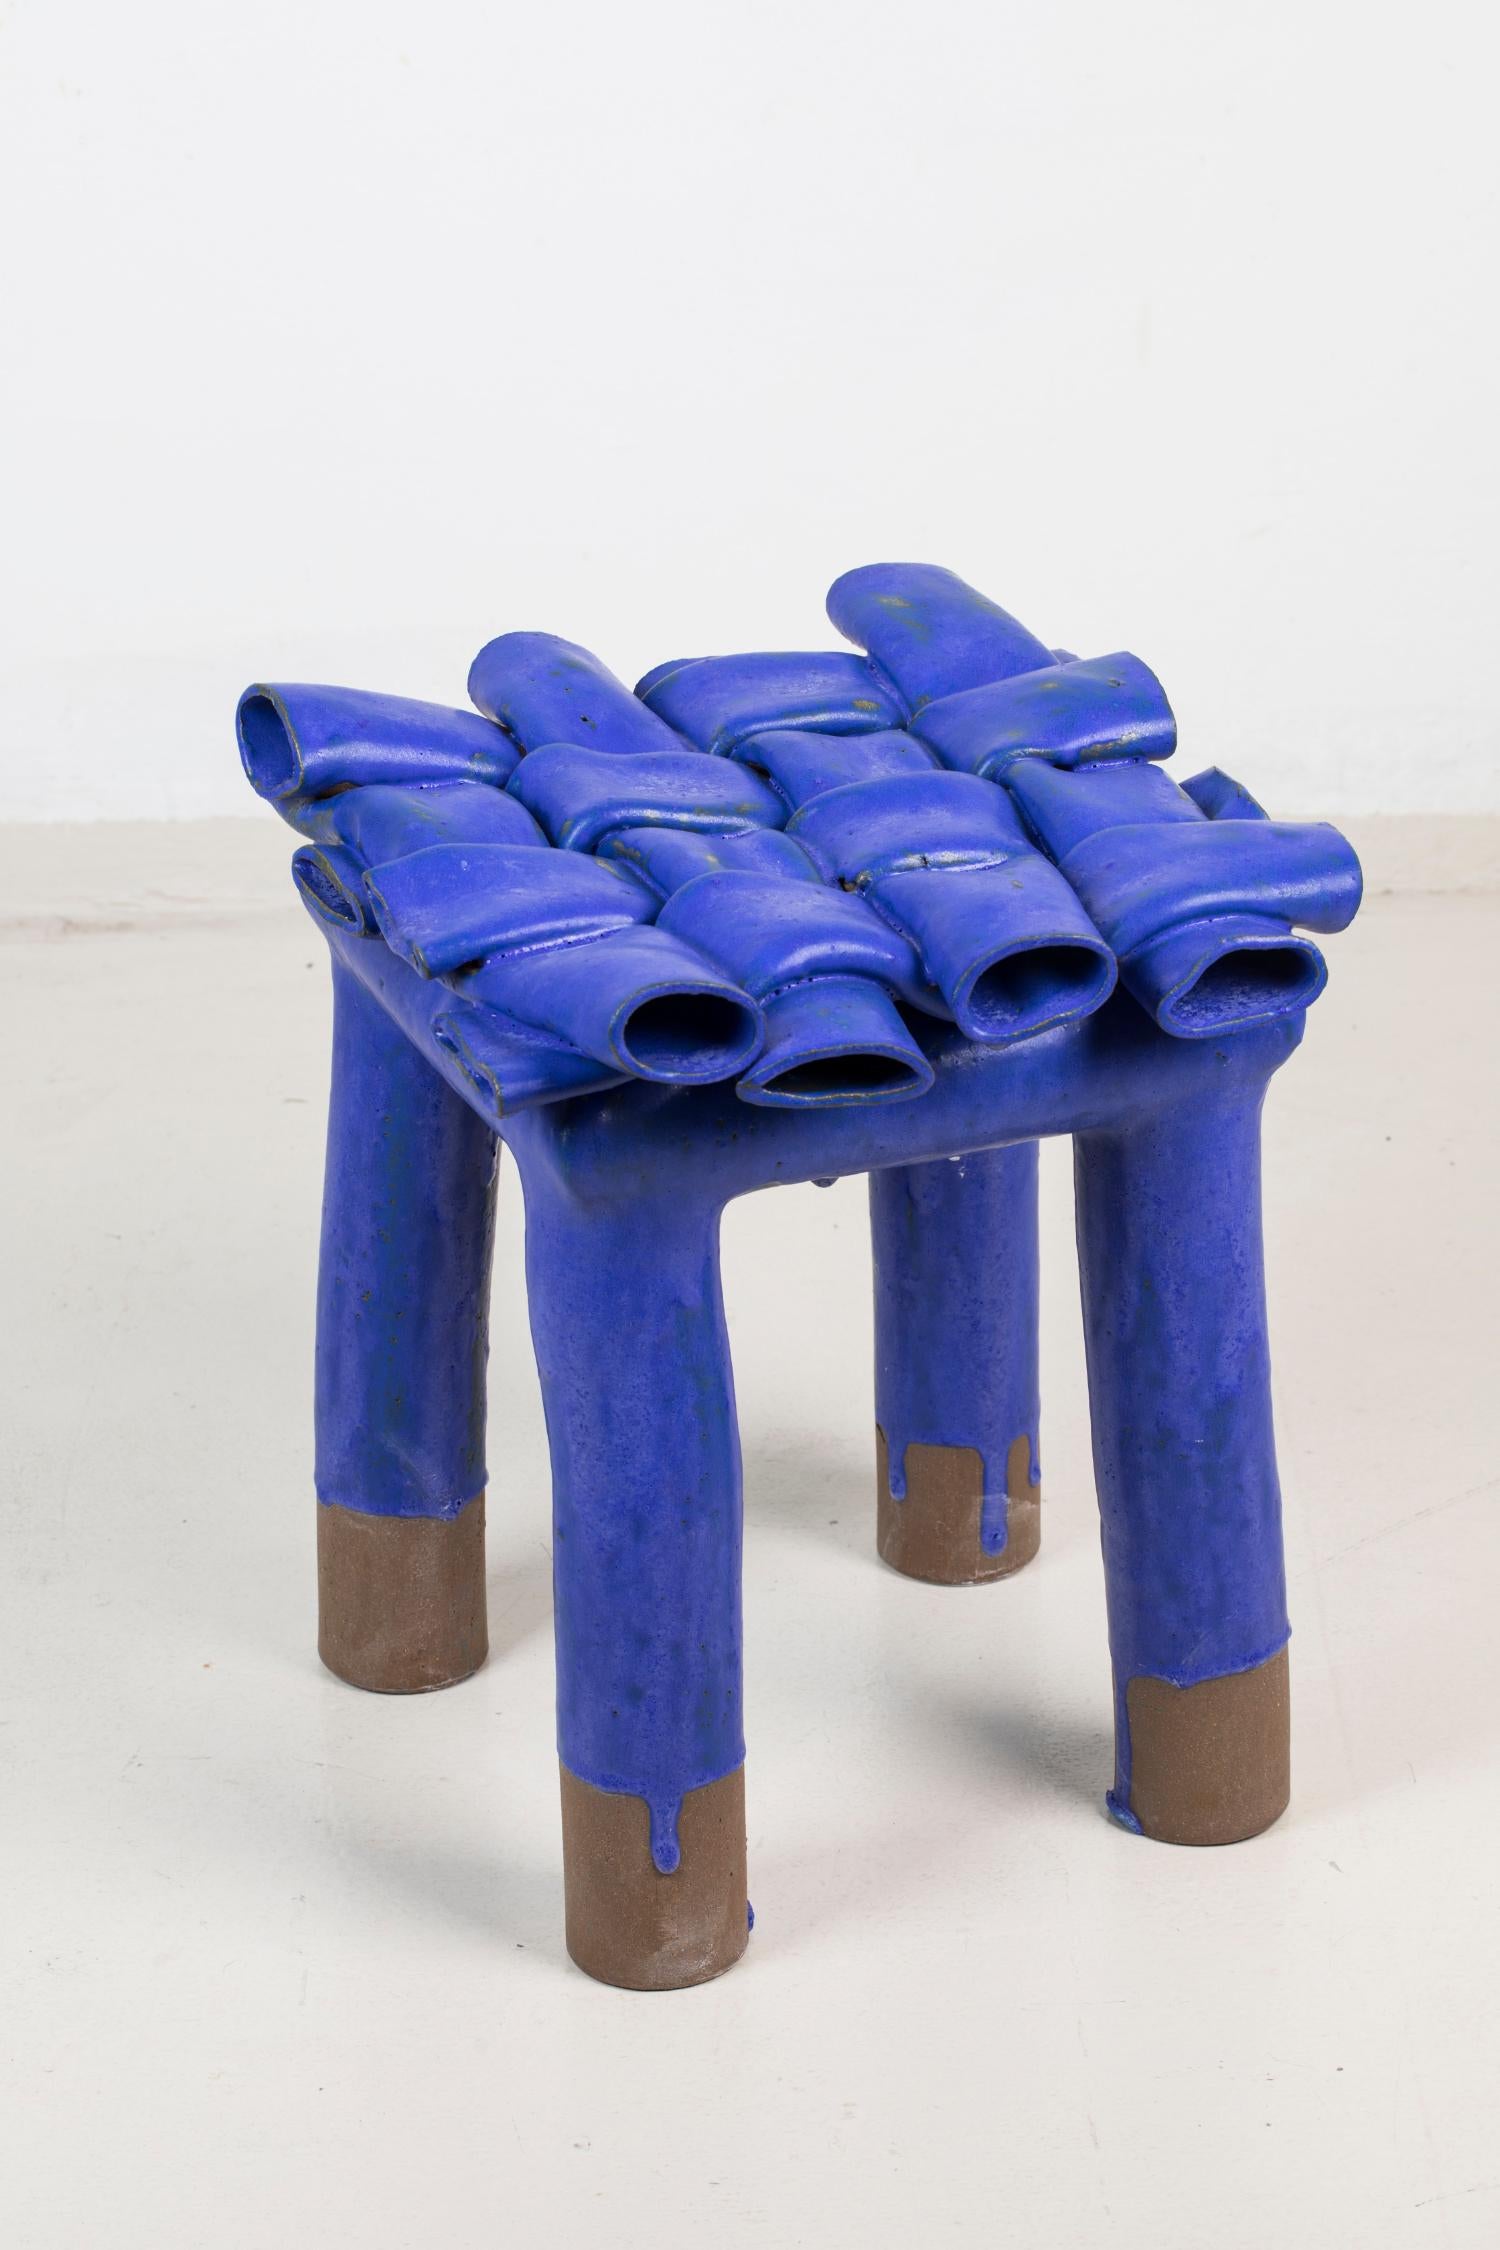 Blue stool by Milan Pekar
Dimensions: 40 x 40 x 42 cm
Materials: Stoneware with Salt Glaze

Hand-made in the Czech Republic. 
Also available in different colors.

Stoneware with salt glaze.

Established own studio August 2009 – Focus mainly